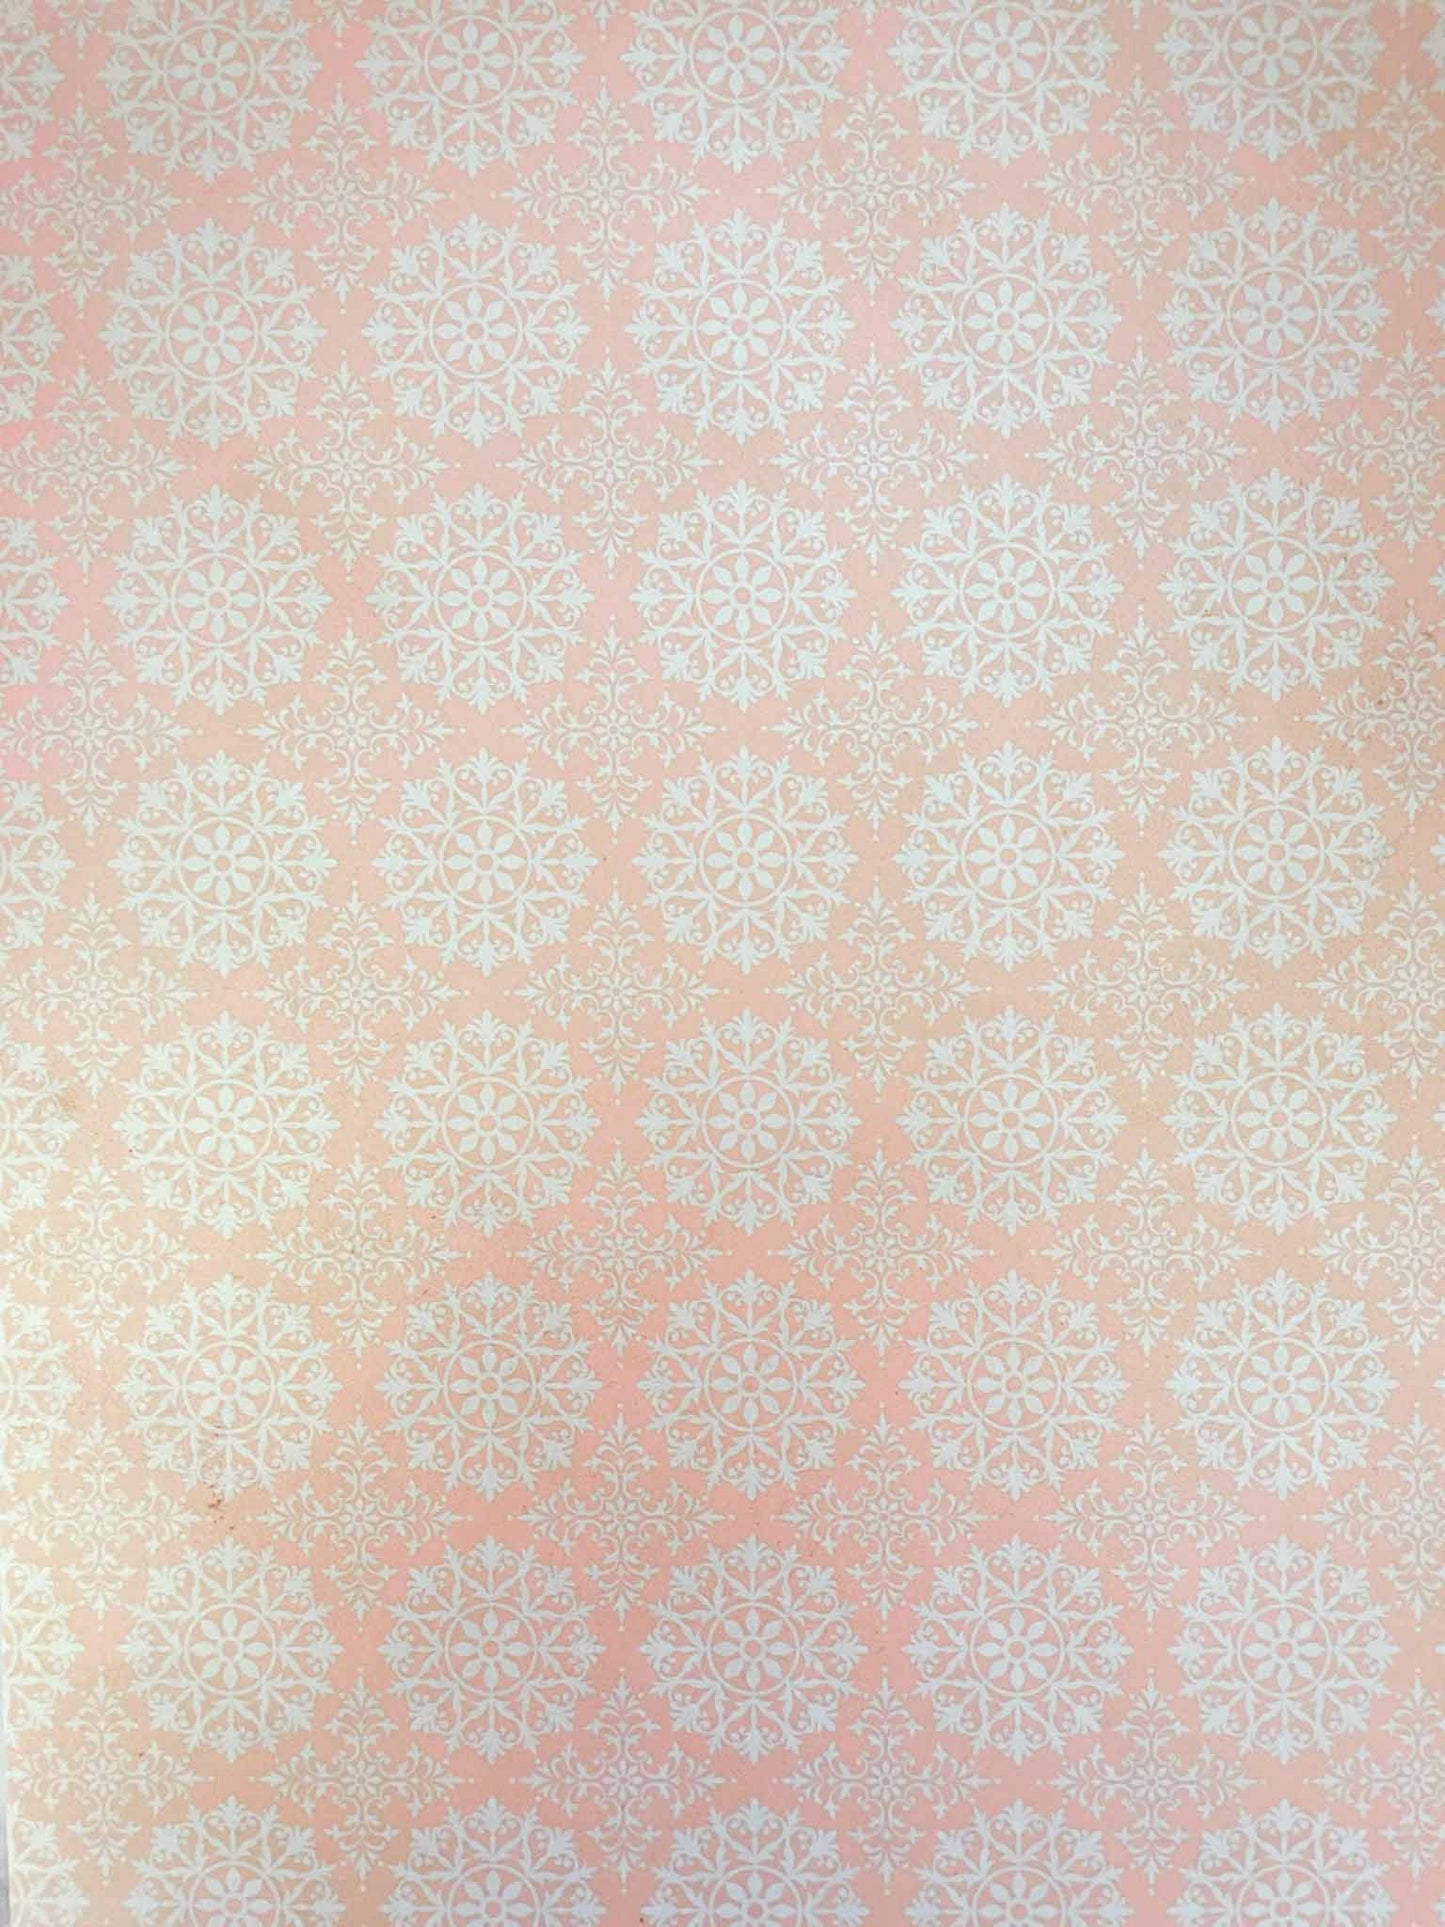 elegance-blush-pink-and-white-patterned-paper